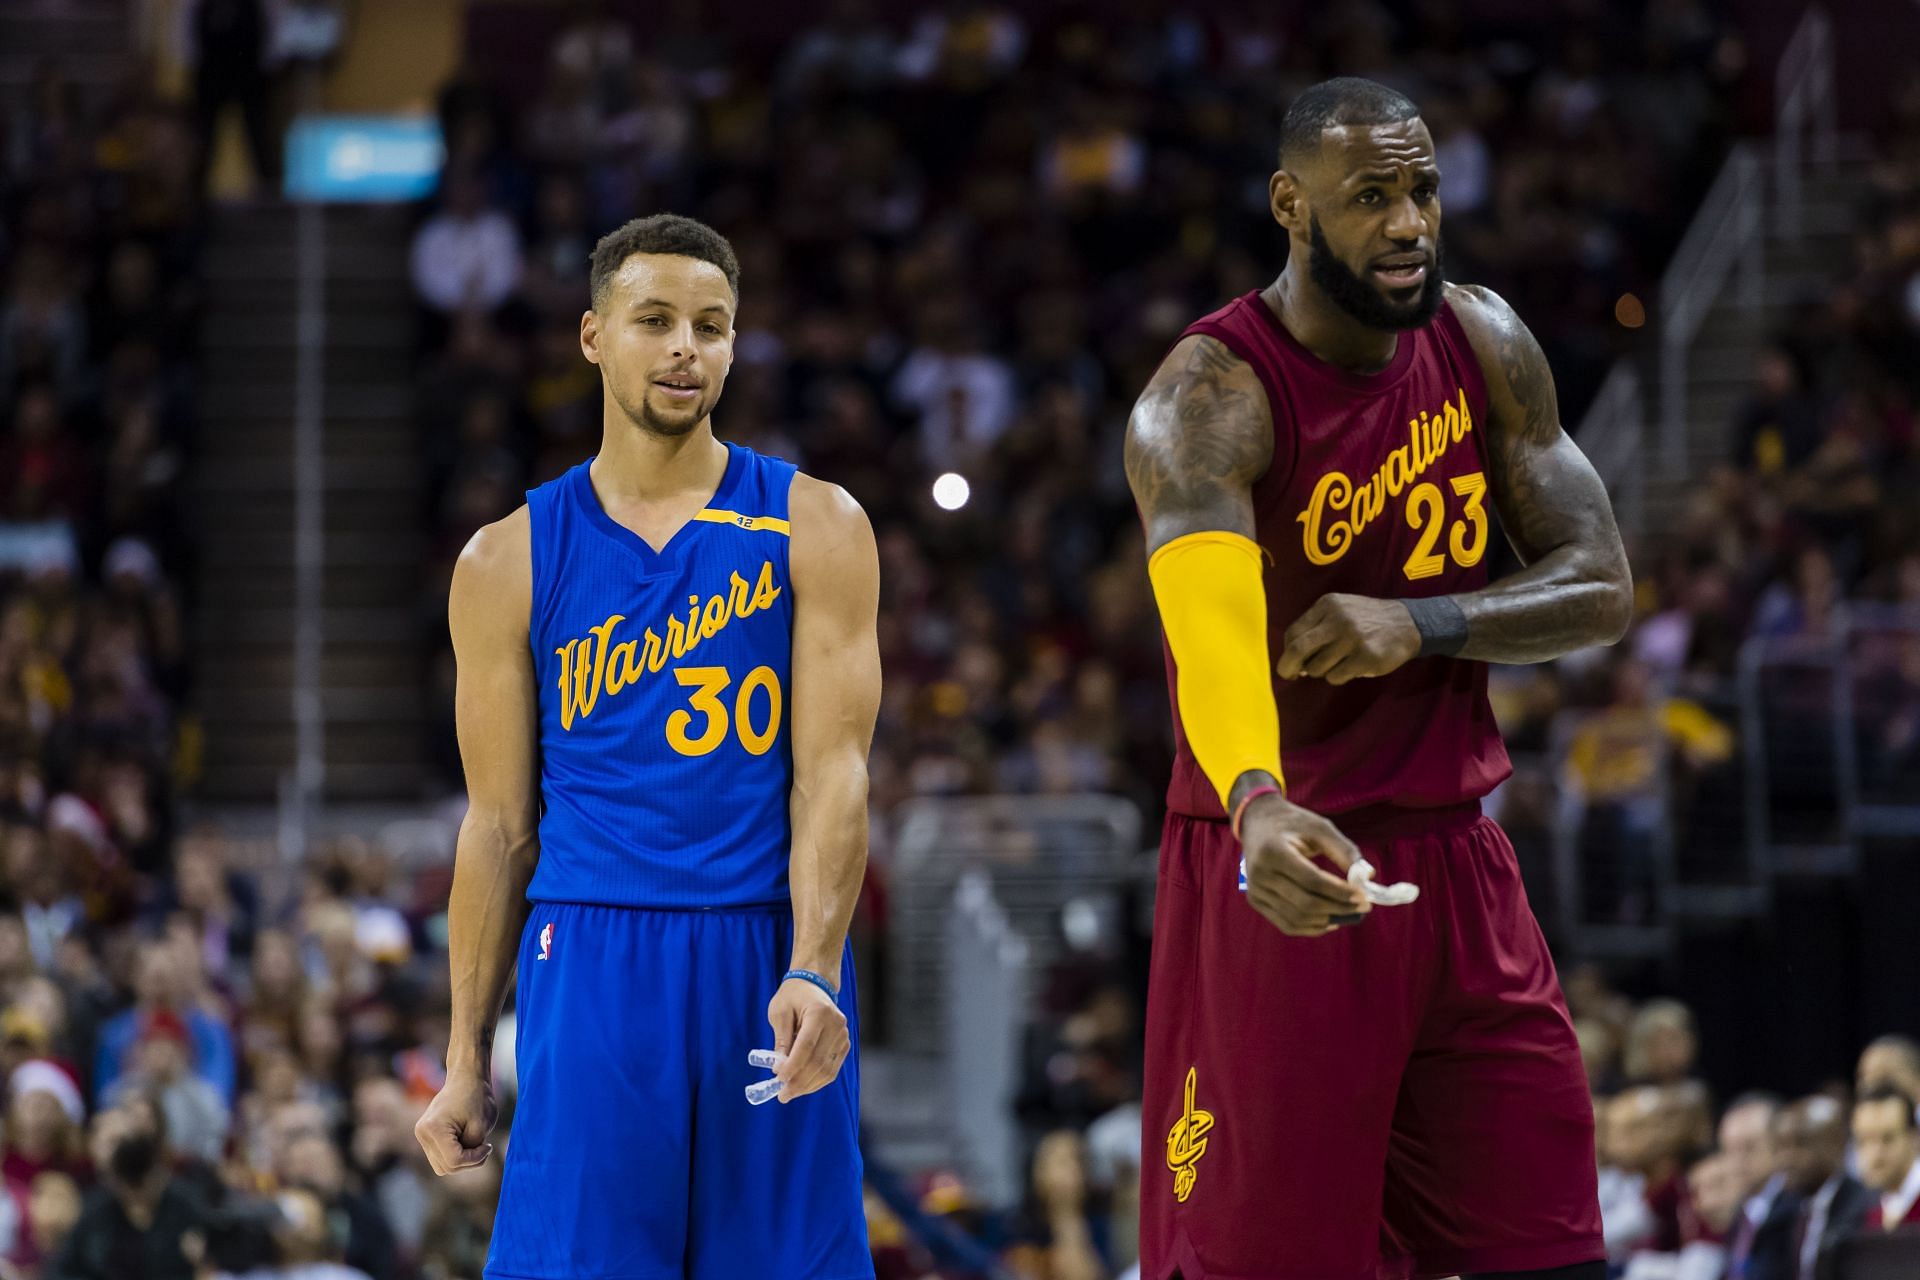 Steph Curry of the Golden State Warriors against LeBron James of the Cleveland Cavaliers in 2016